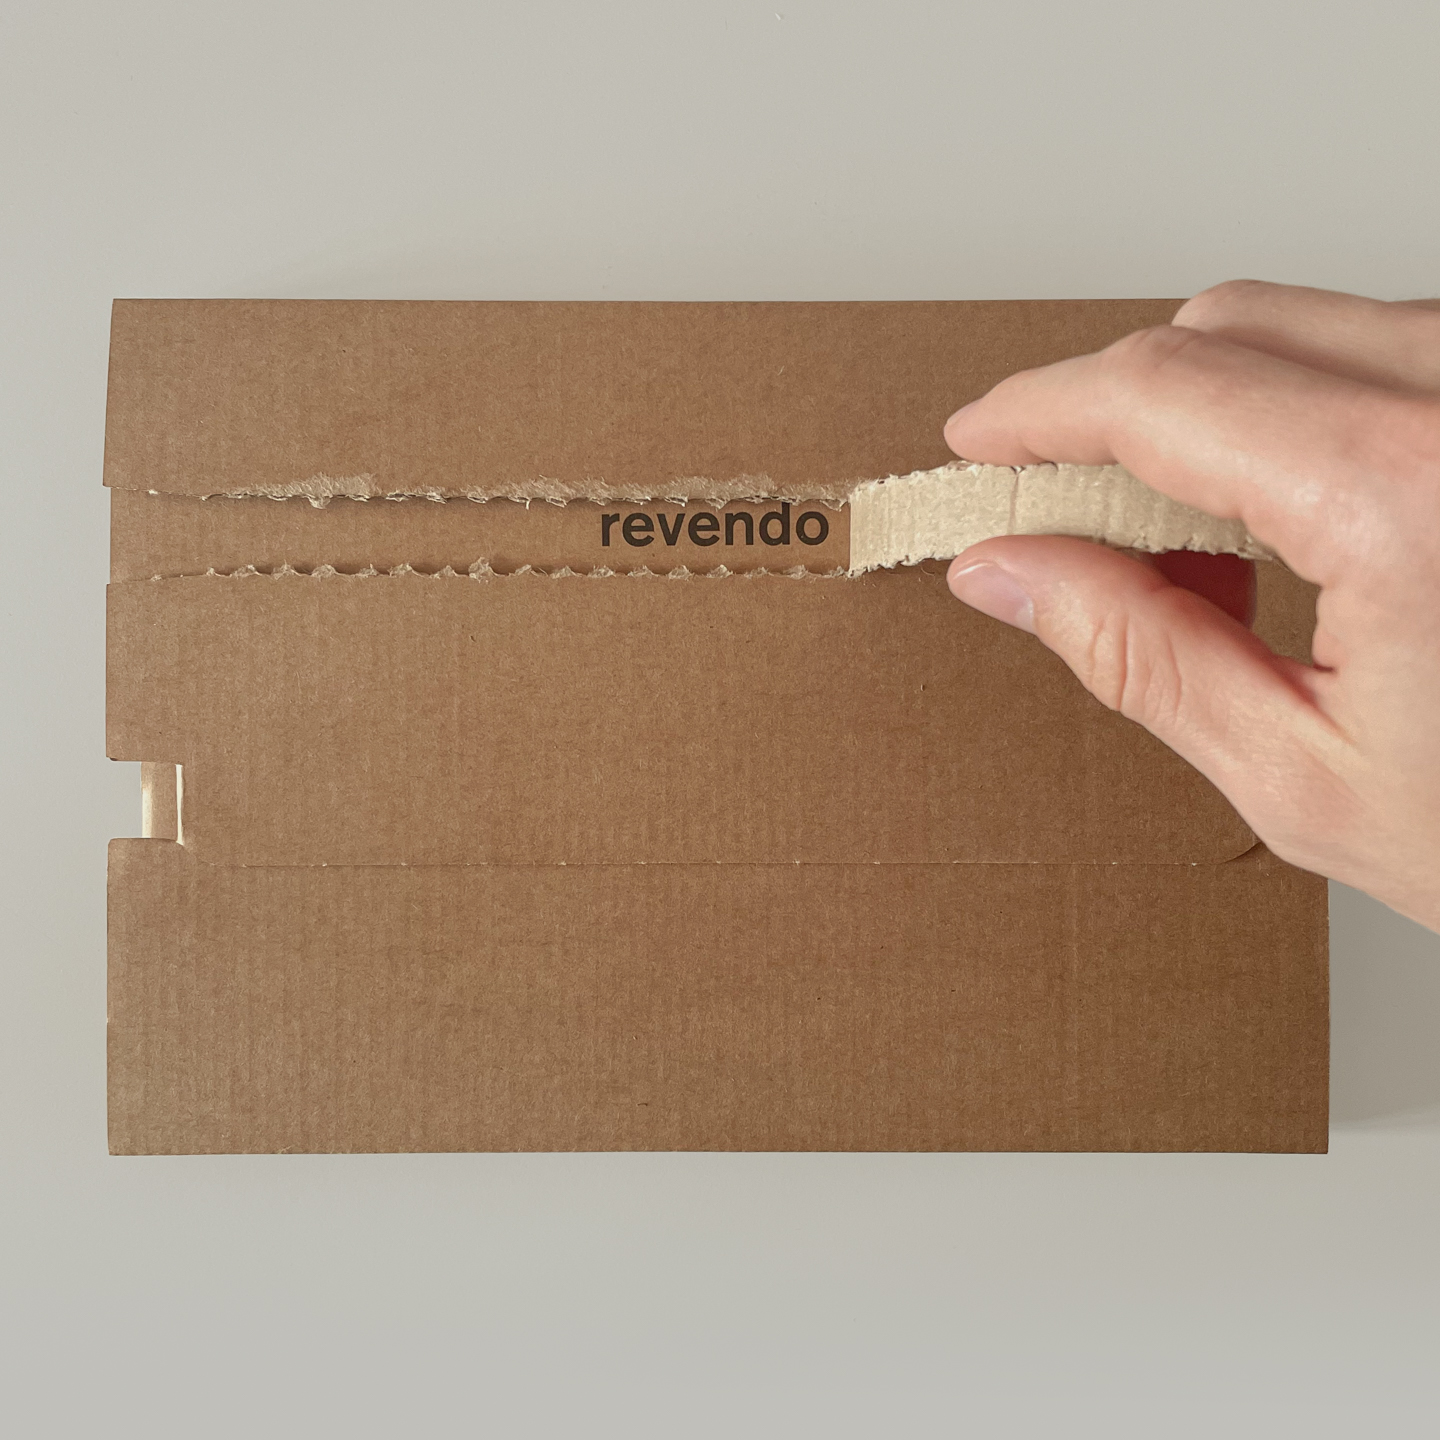 Gallery One for all Revendo packaging